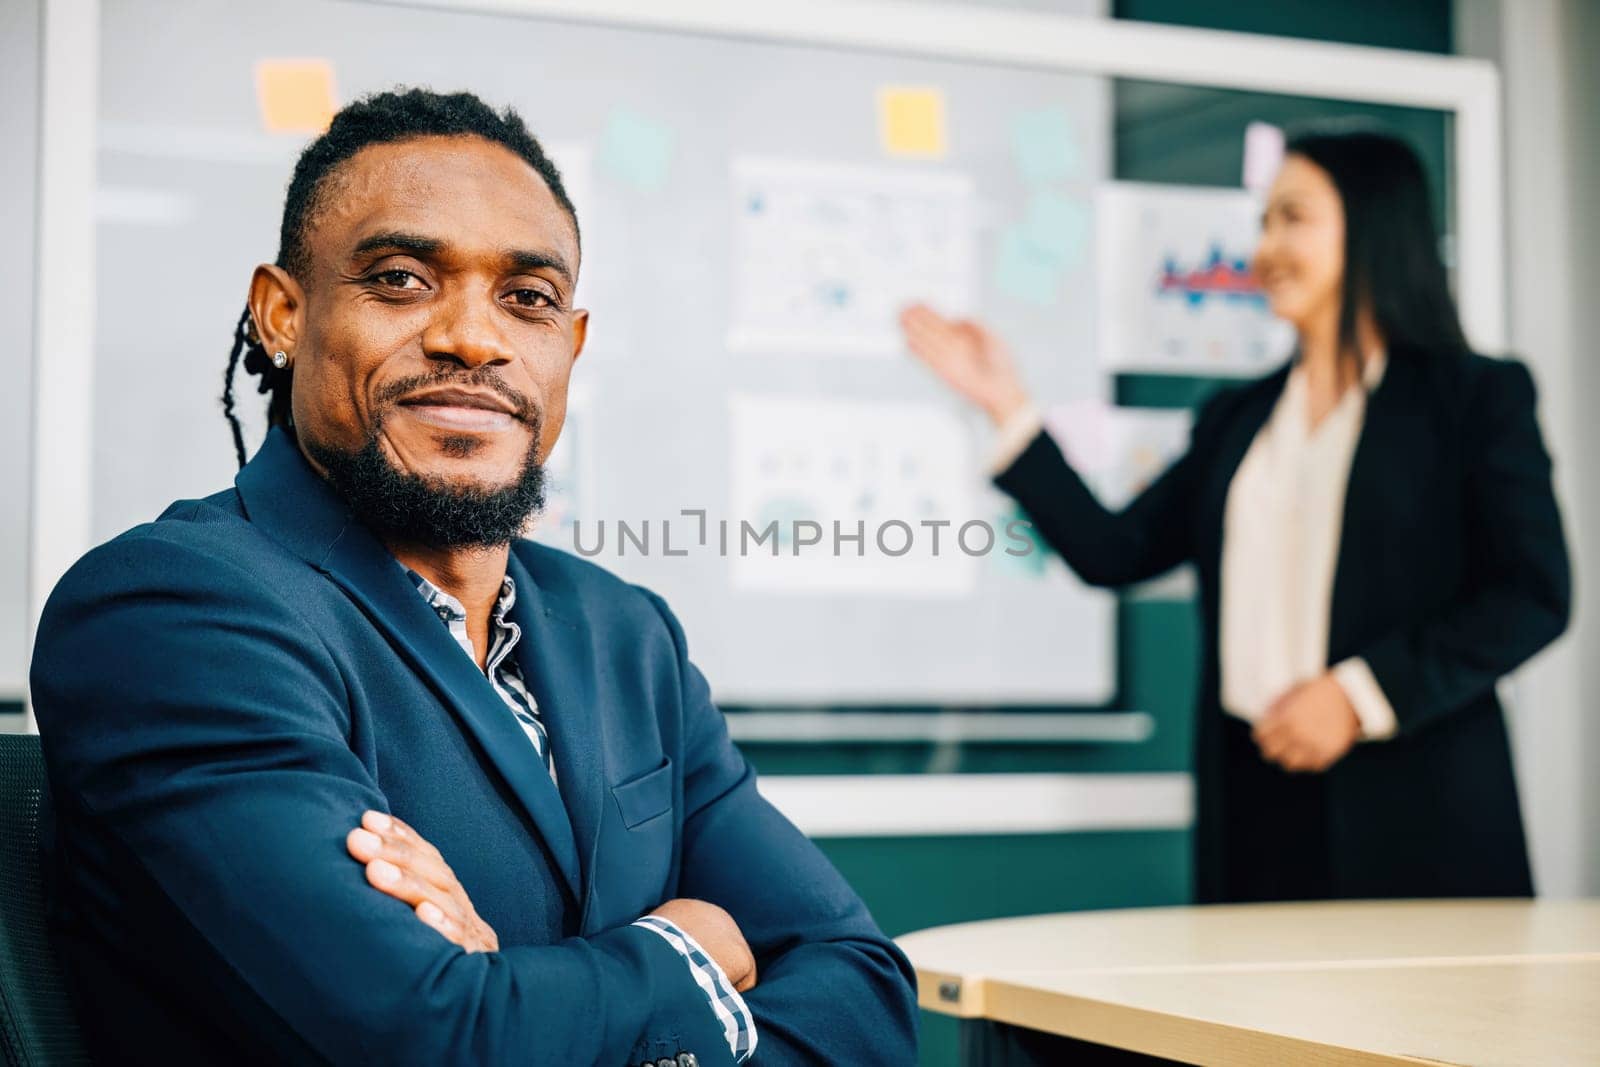 Confident and successful, black businessman, CEO and leader, is at team meeting in an office. He smiles, reflecting leadership in a diverse workplace. A portrait of excellence in corporate leadership. by Sorapop